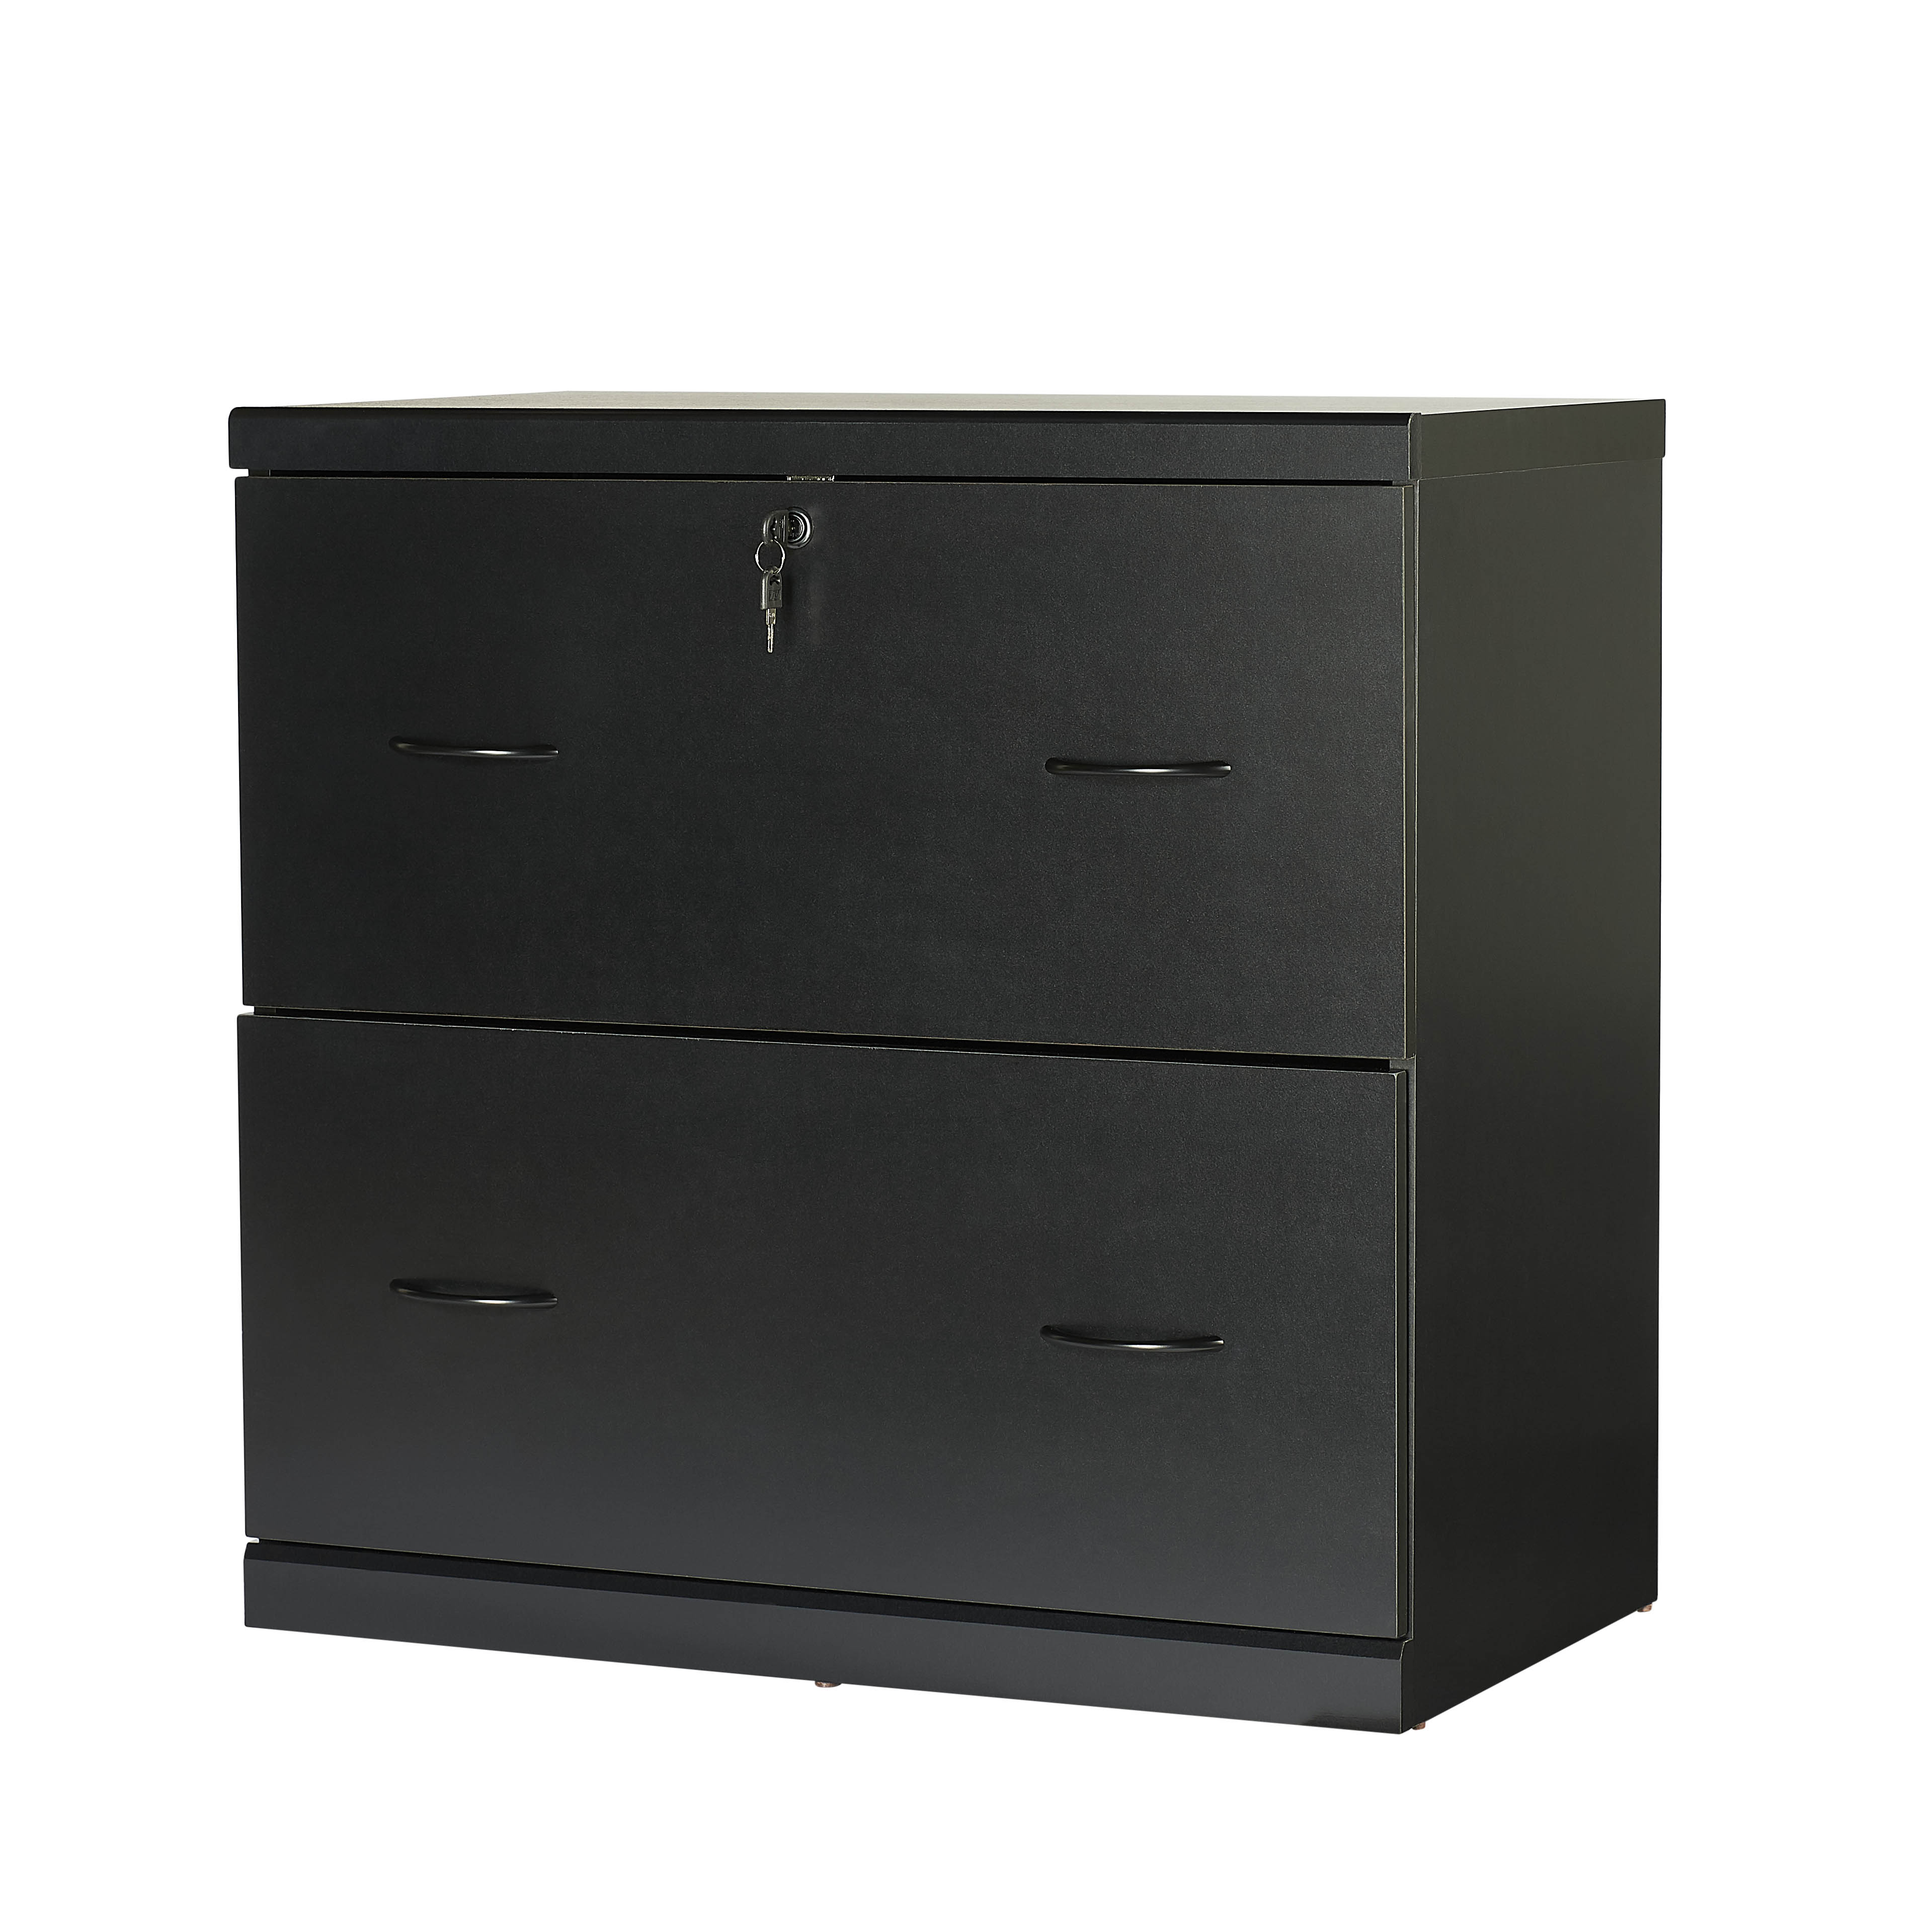 Mainstays 2 Drawer Lateral Locking File Cabinet Walmart pertaining to dimensions 3840 X 3840